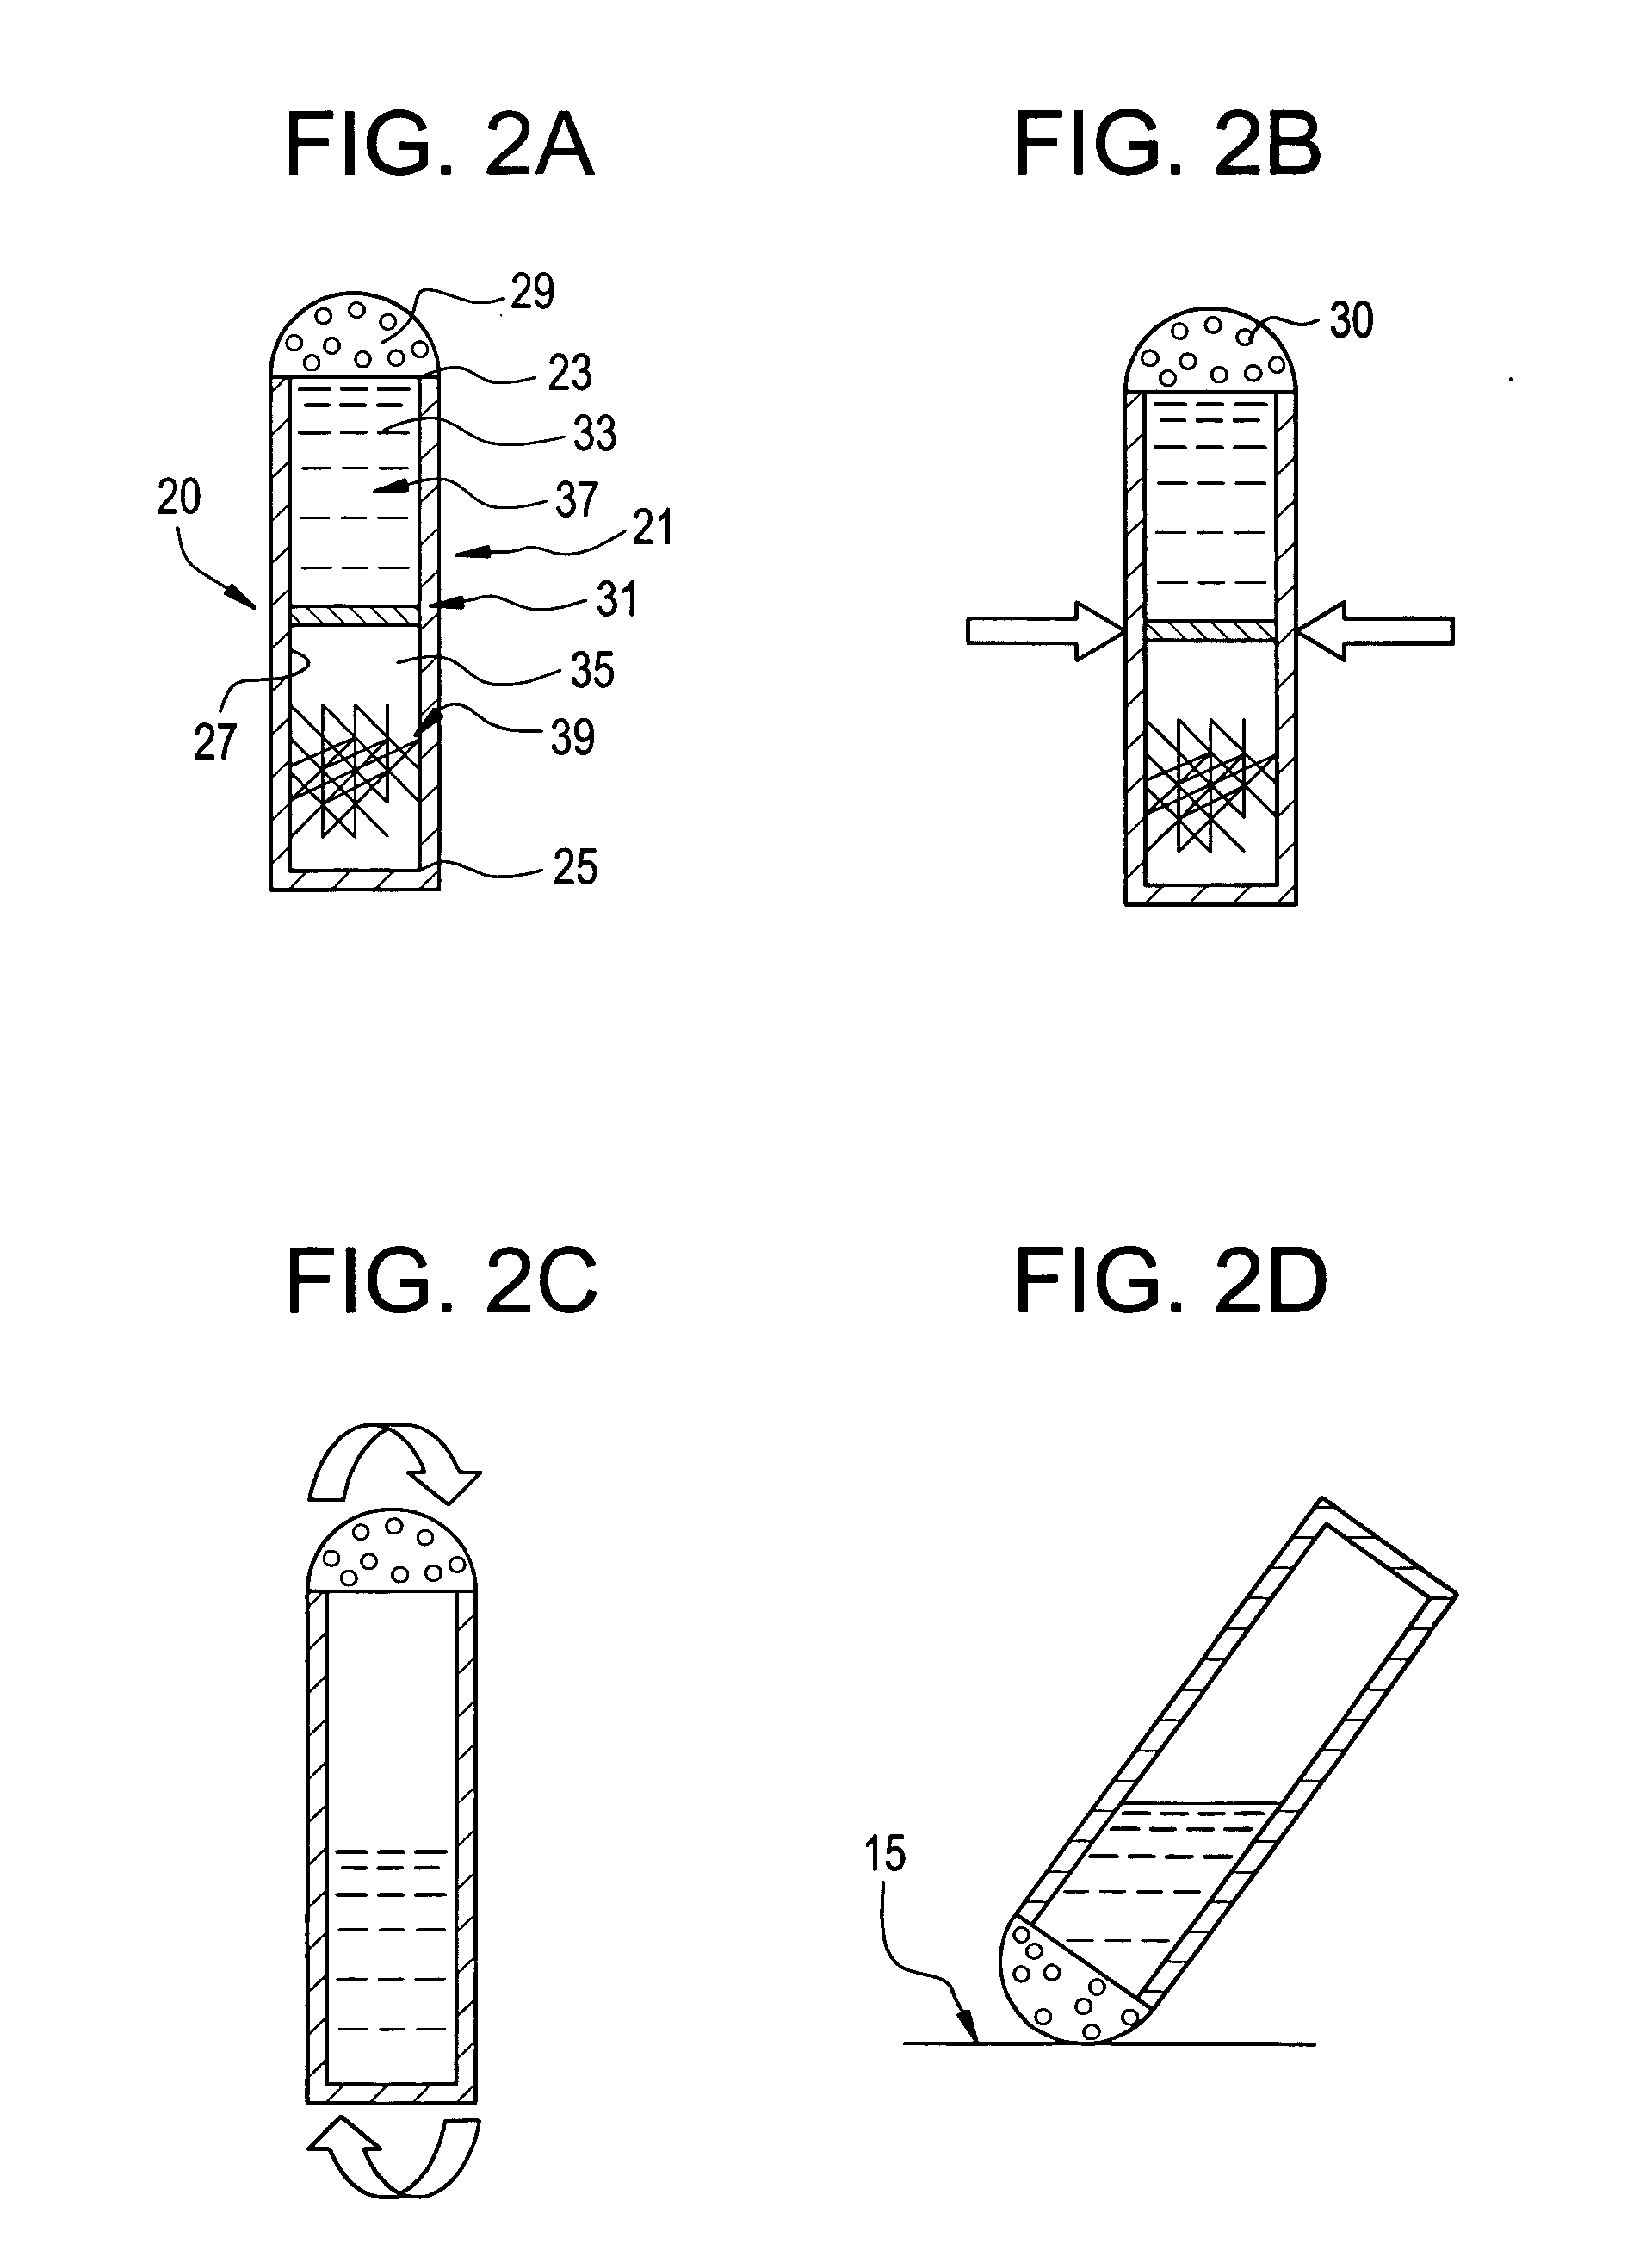 Method of intraoperative coating therapeutic agents onto sutures